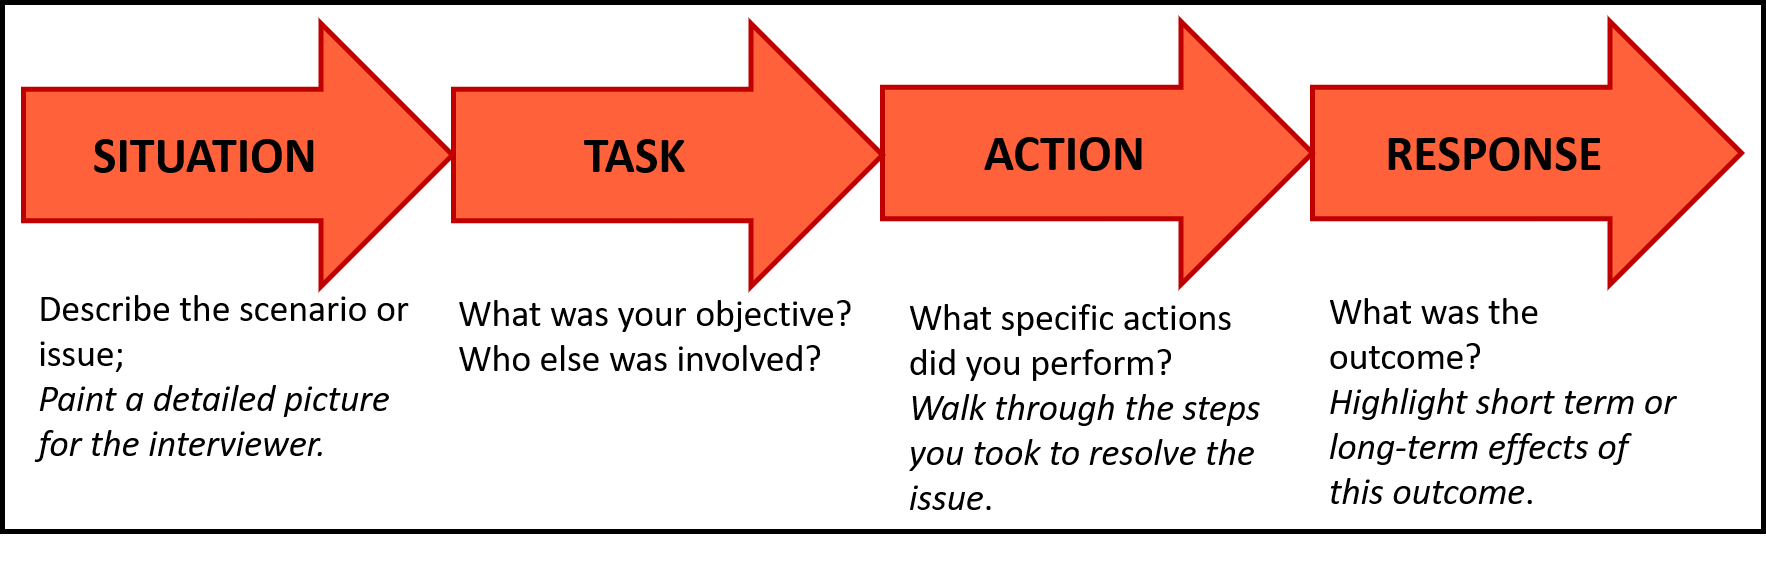 Situation: Describe the scenario or issue;  Paint a detailed picture for the interviewer. Task: What was your objective?  Who else was involved? Action: What specific actions did you perform?  Walk through the steps you took to resolve the issue. Result:  What was the outcome?  Highlight short term or long-term effects of this outcome.